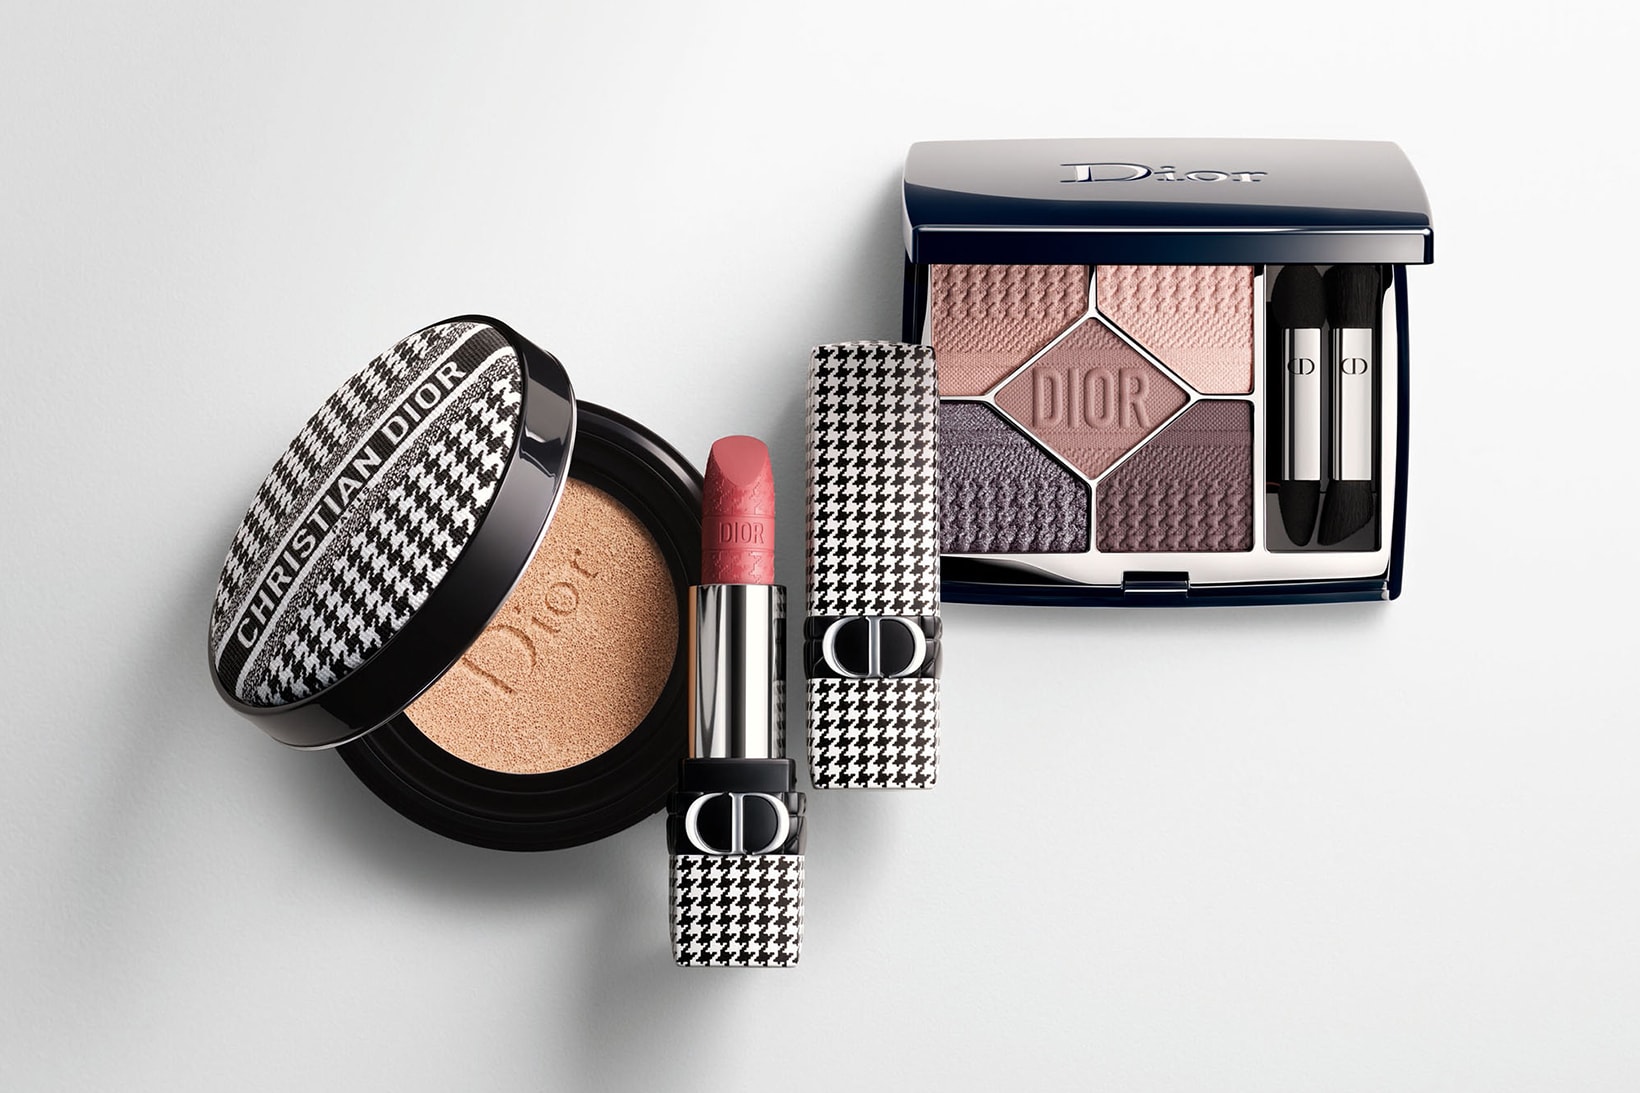 Dior Makeup New Look Collection Release